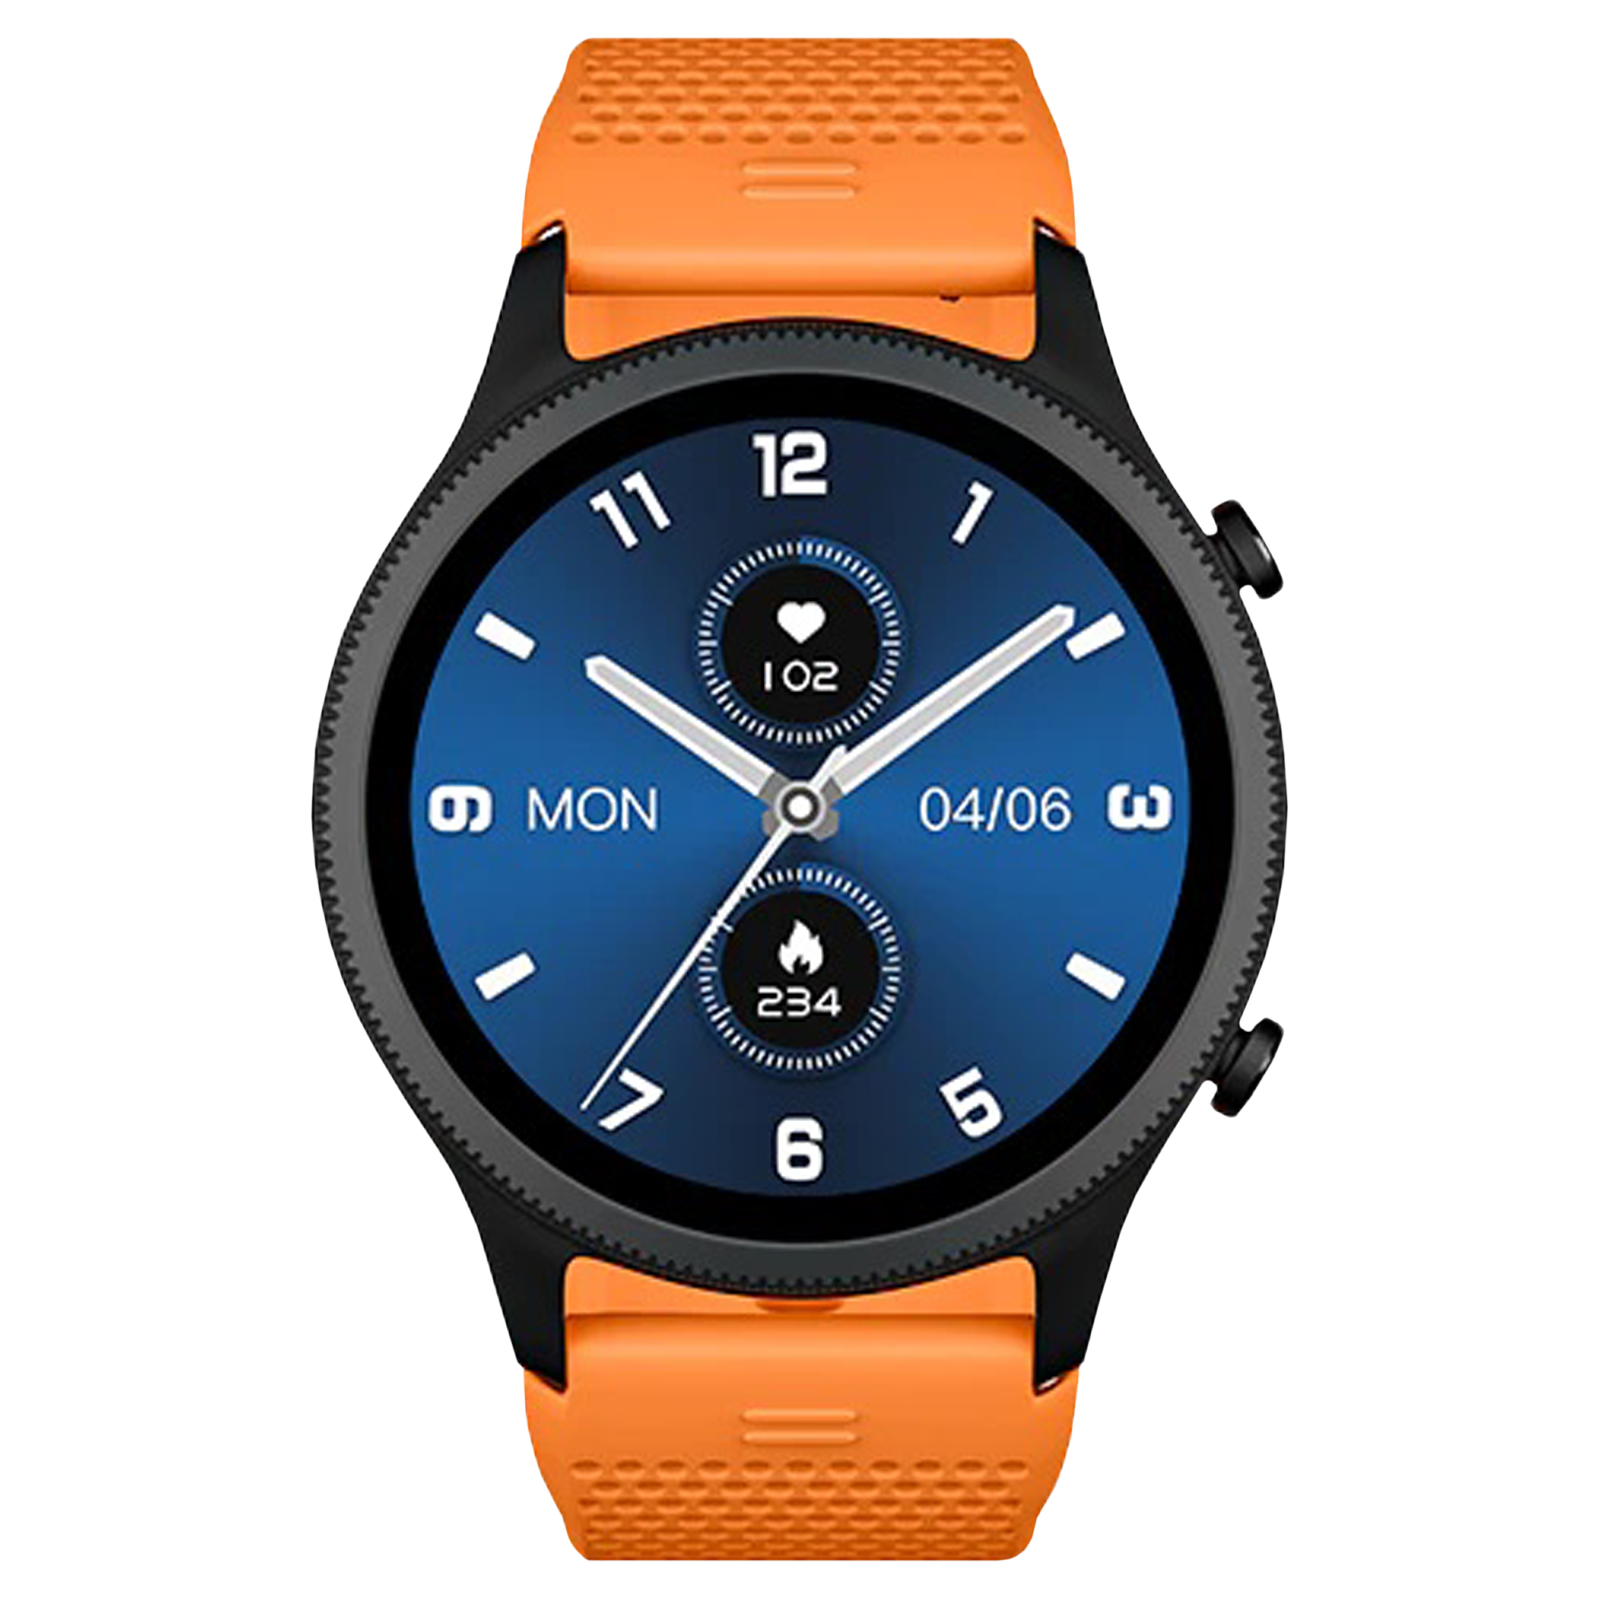 Noise NoiseFit Halo Smartwatch with Bluetooth Calling (36mm AMOLED Display, IP68 Water Resistant, Fiery Orange Strap)_1